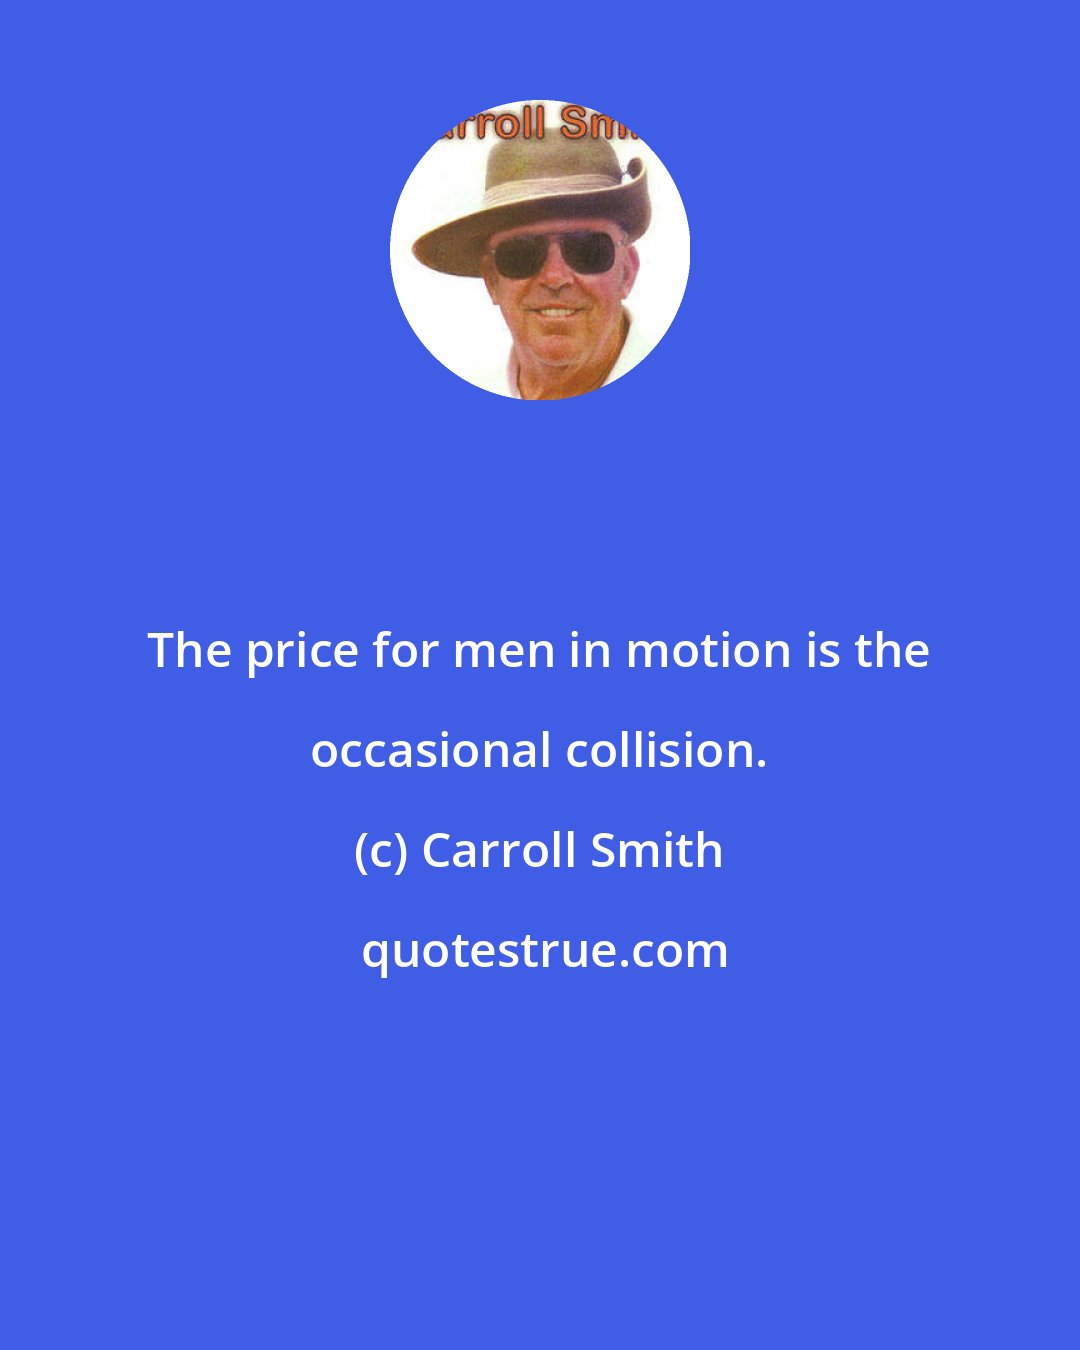 Carroll Smith: The price for men in motion is the occasional collision.